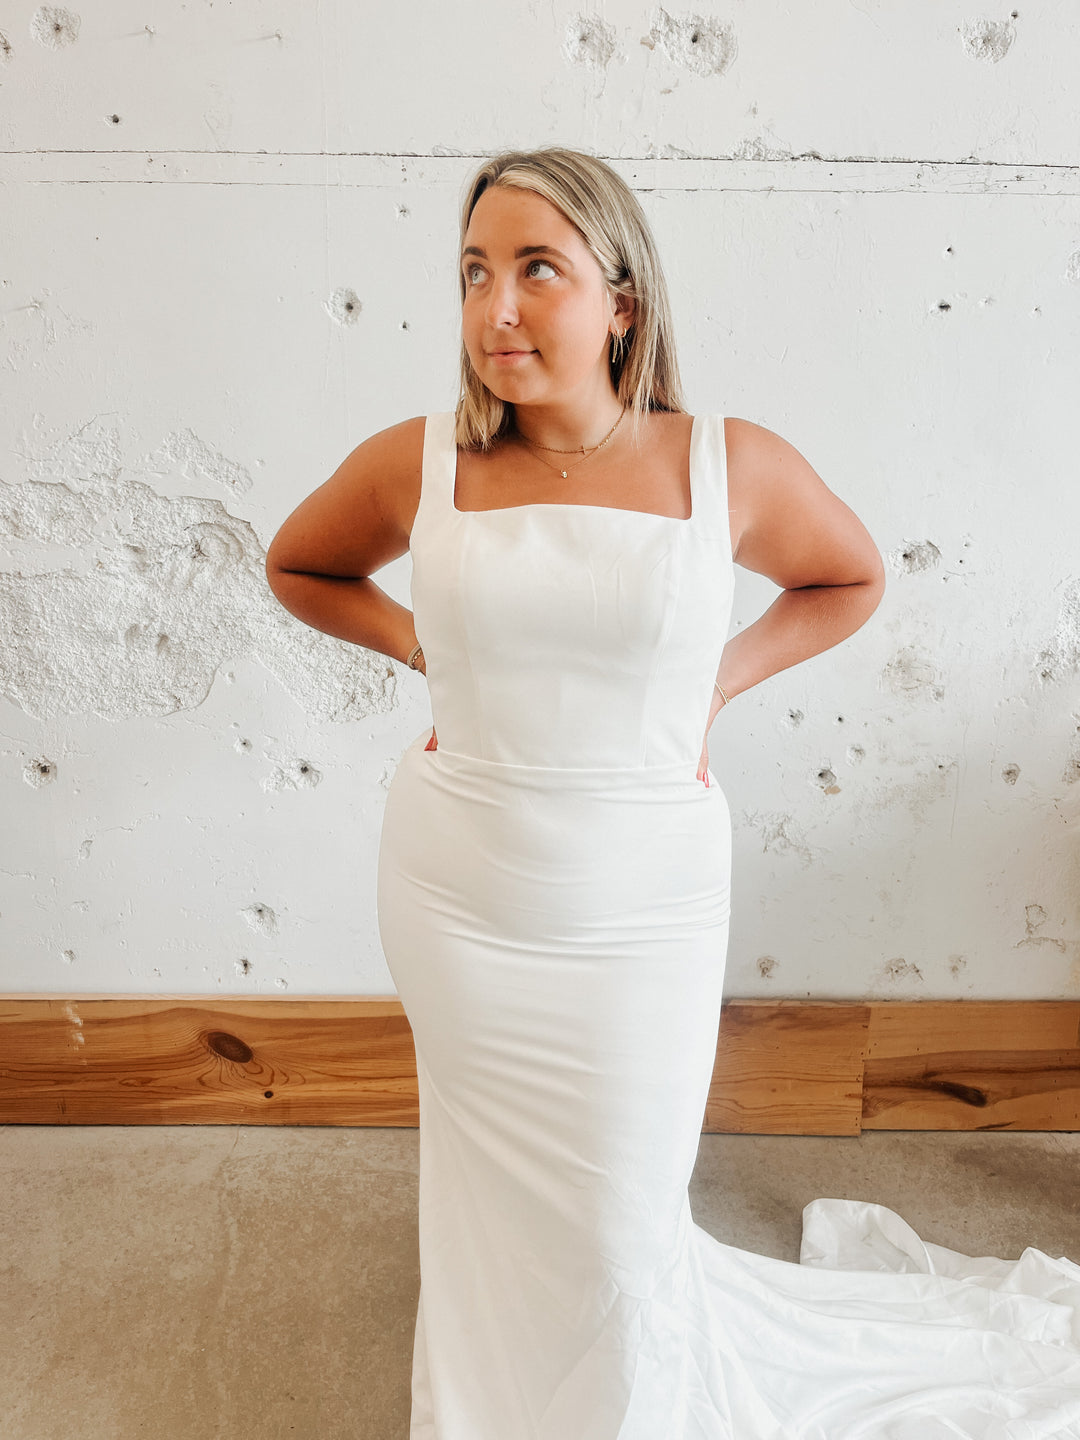 Tag Size 12 | Dearly Loved Bridal